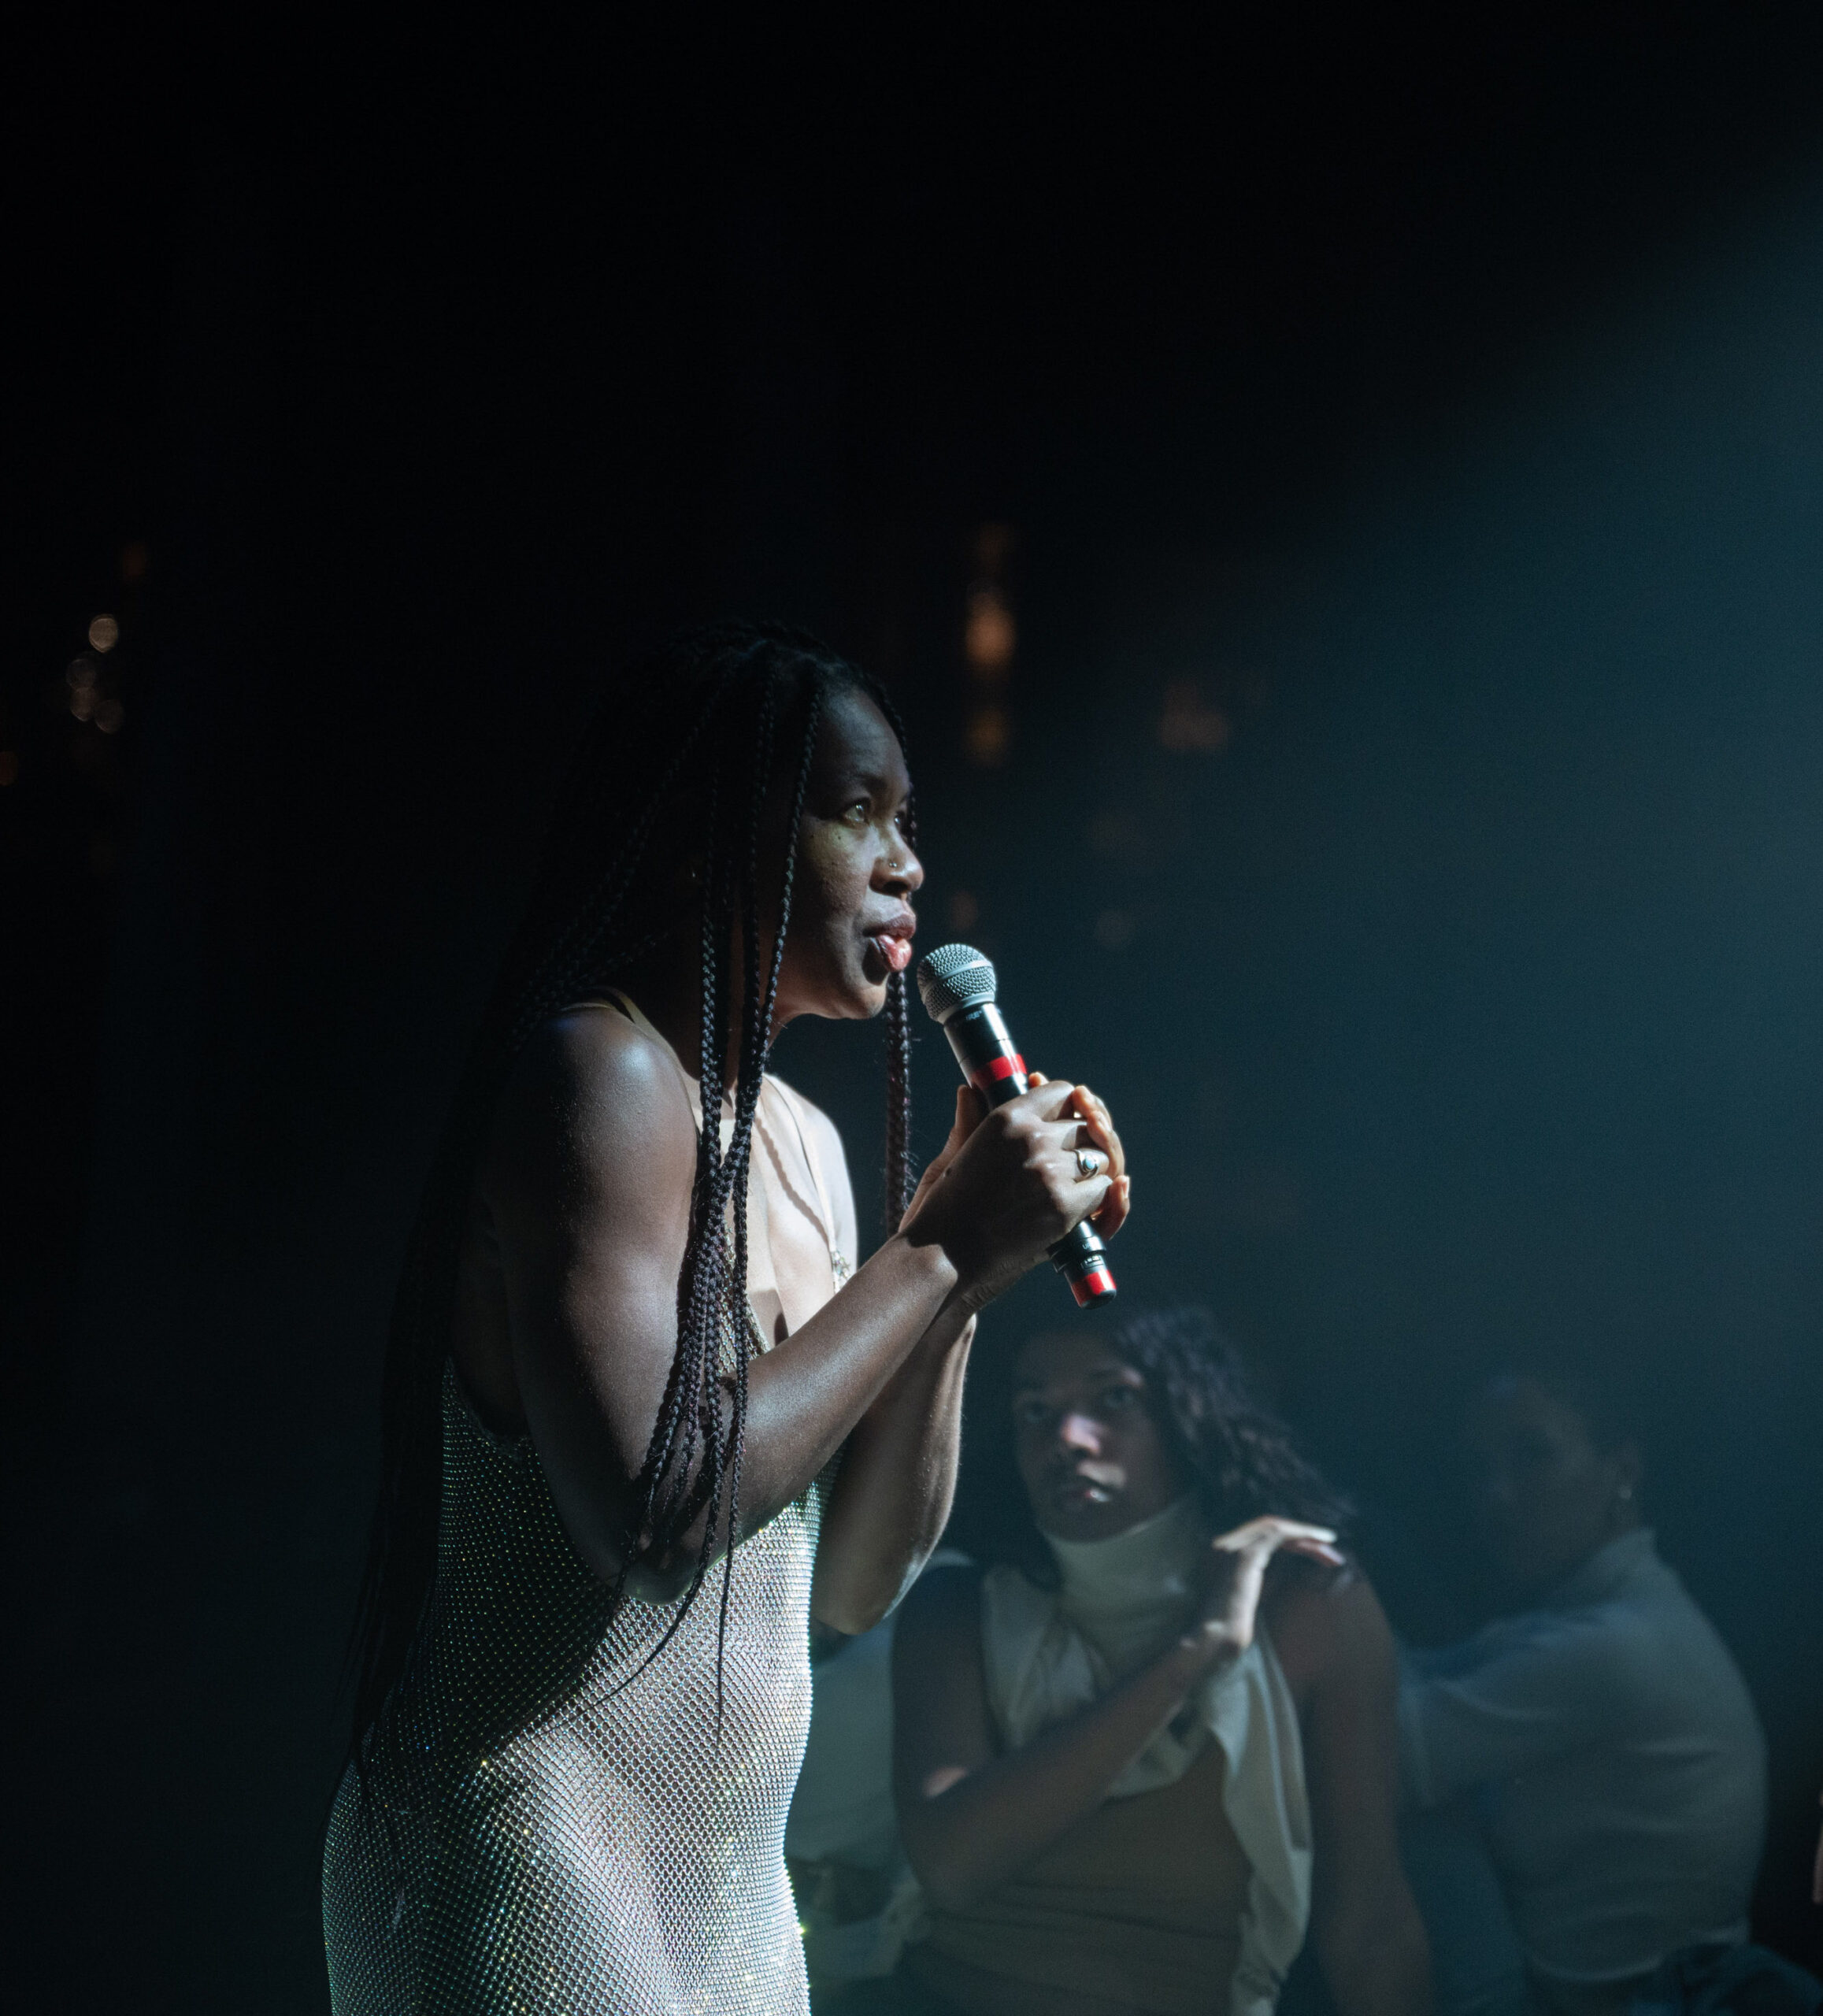 mayfield brooks, a chestnut brown skinned individual, is wearing a sparkly dress and visible in the glow of a single spotlight that illuminates them holding a microphone and speaking to seating audience members that surround them.